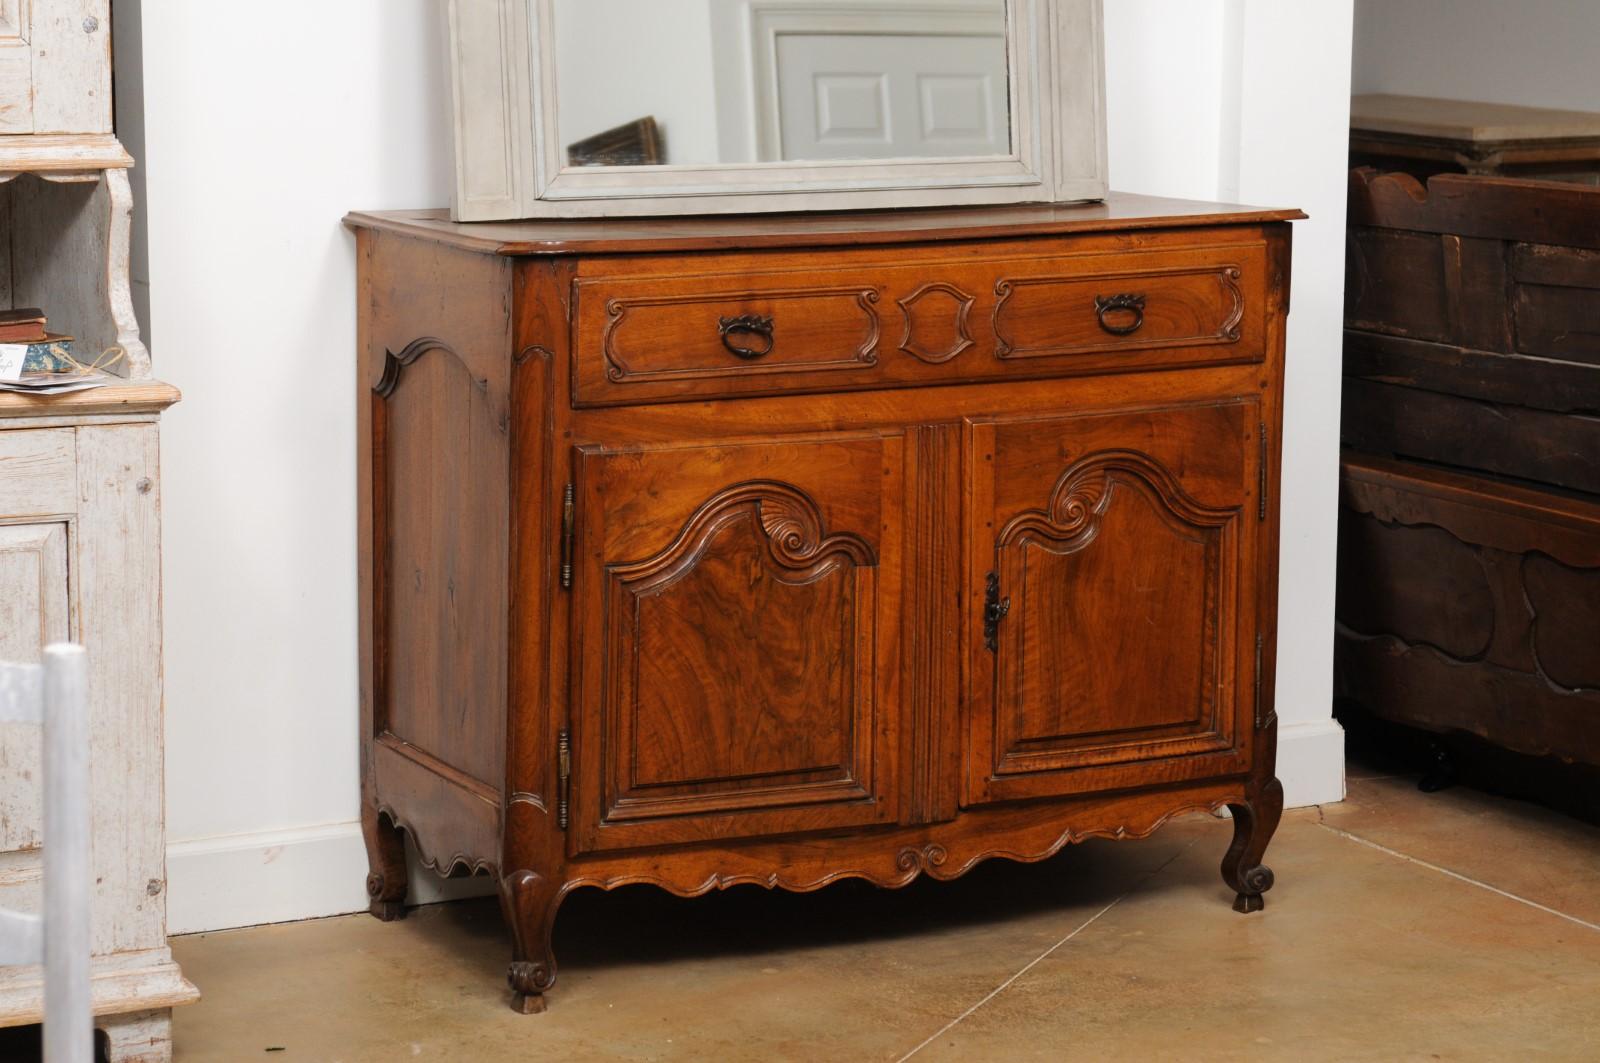 A French Louis XV period mid-18th century walnut buffet from Provence with single drawer and two doors. Created in Provence during the reign of King Louis XV nicknamed the Beloved (le Bien-Aimé), this southern French walnut buffet features a